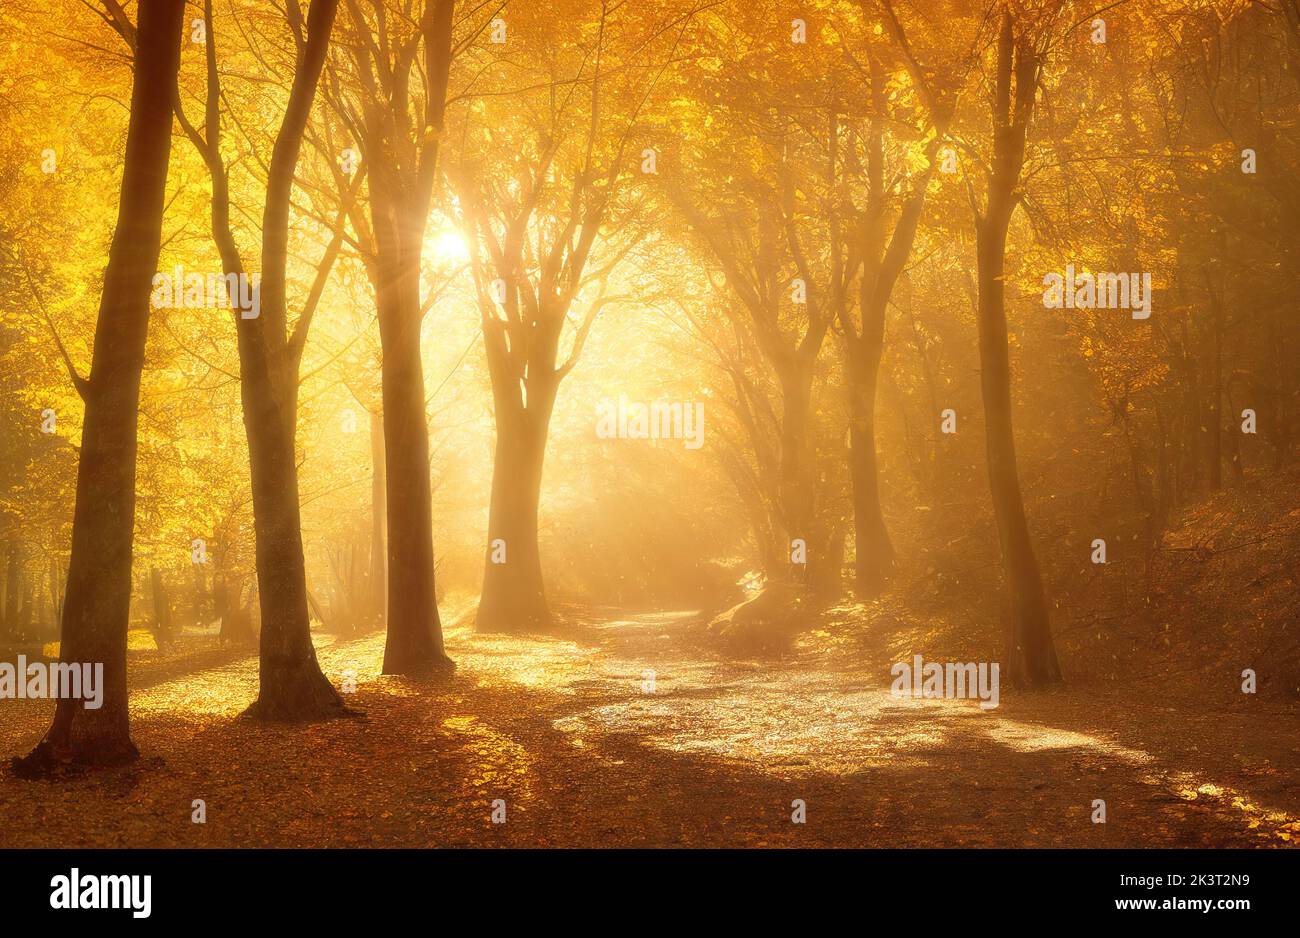 Warm mist in autumn forest, tree silhuettes, shining sun through golden tree branches. Digital 3D illustration Stock Photo